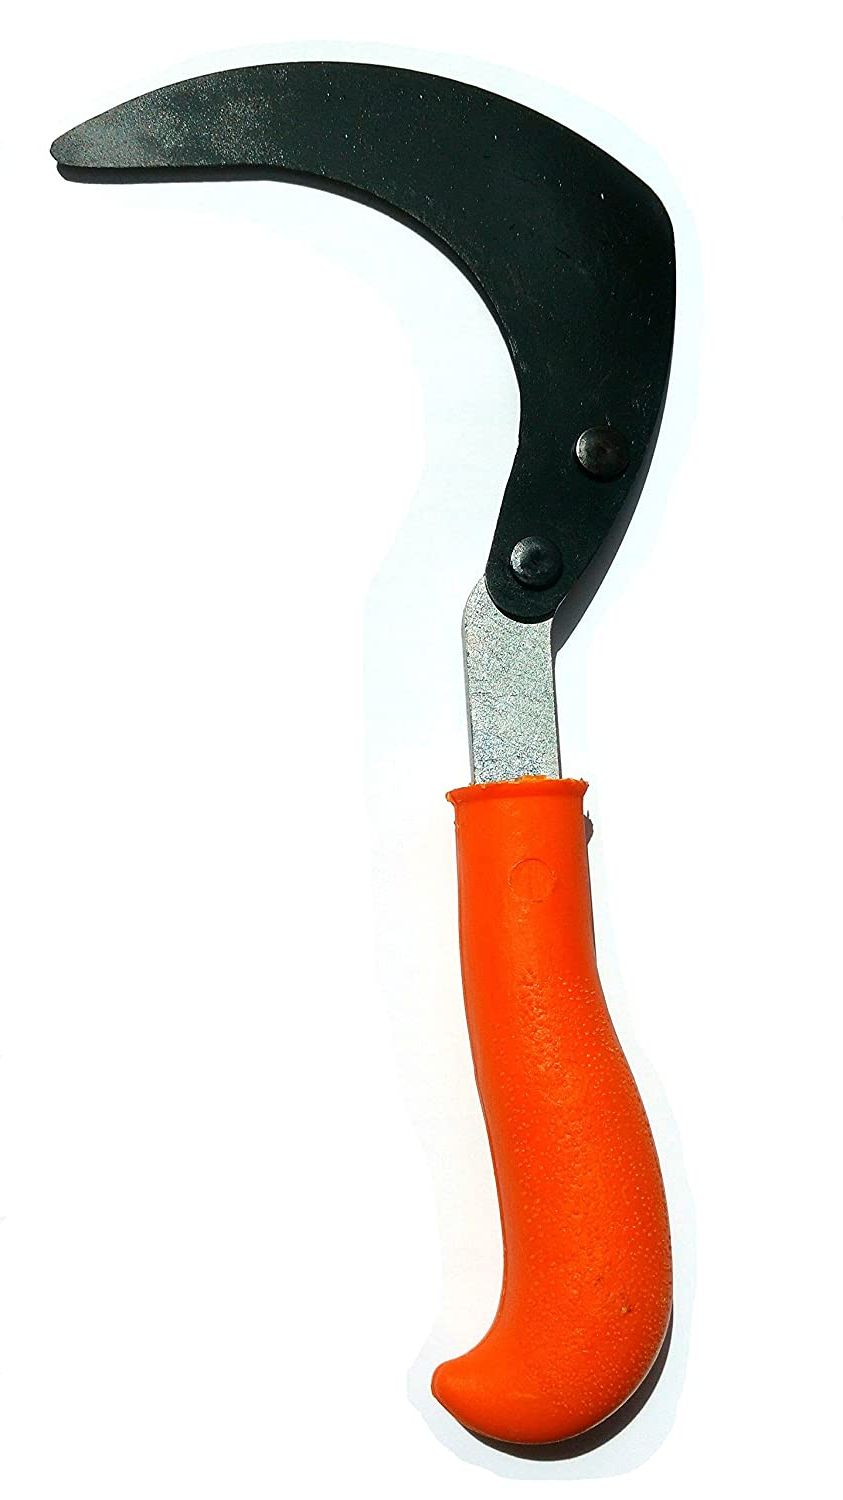 Preferred Carmon Ceramic Garden Tool Intended For Buy Garden House Khurapi With Plastic Handle Online At Low (View 11 of 30)